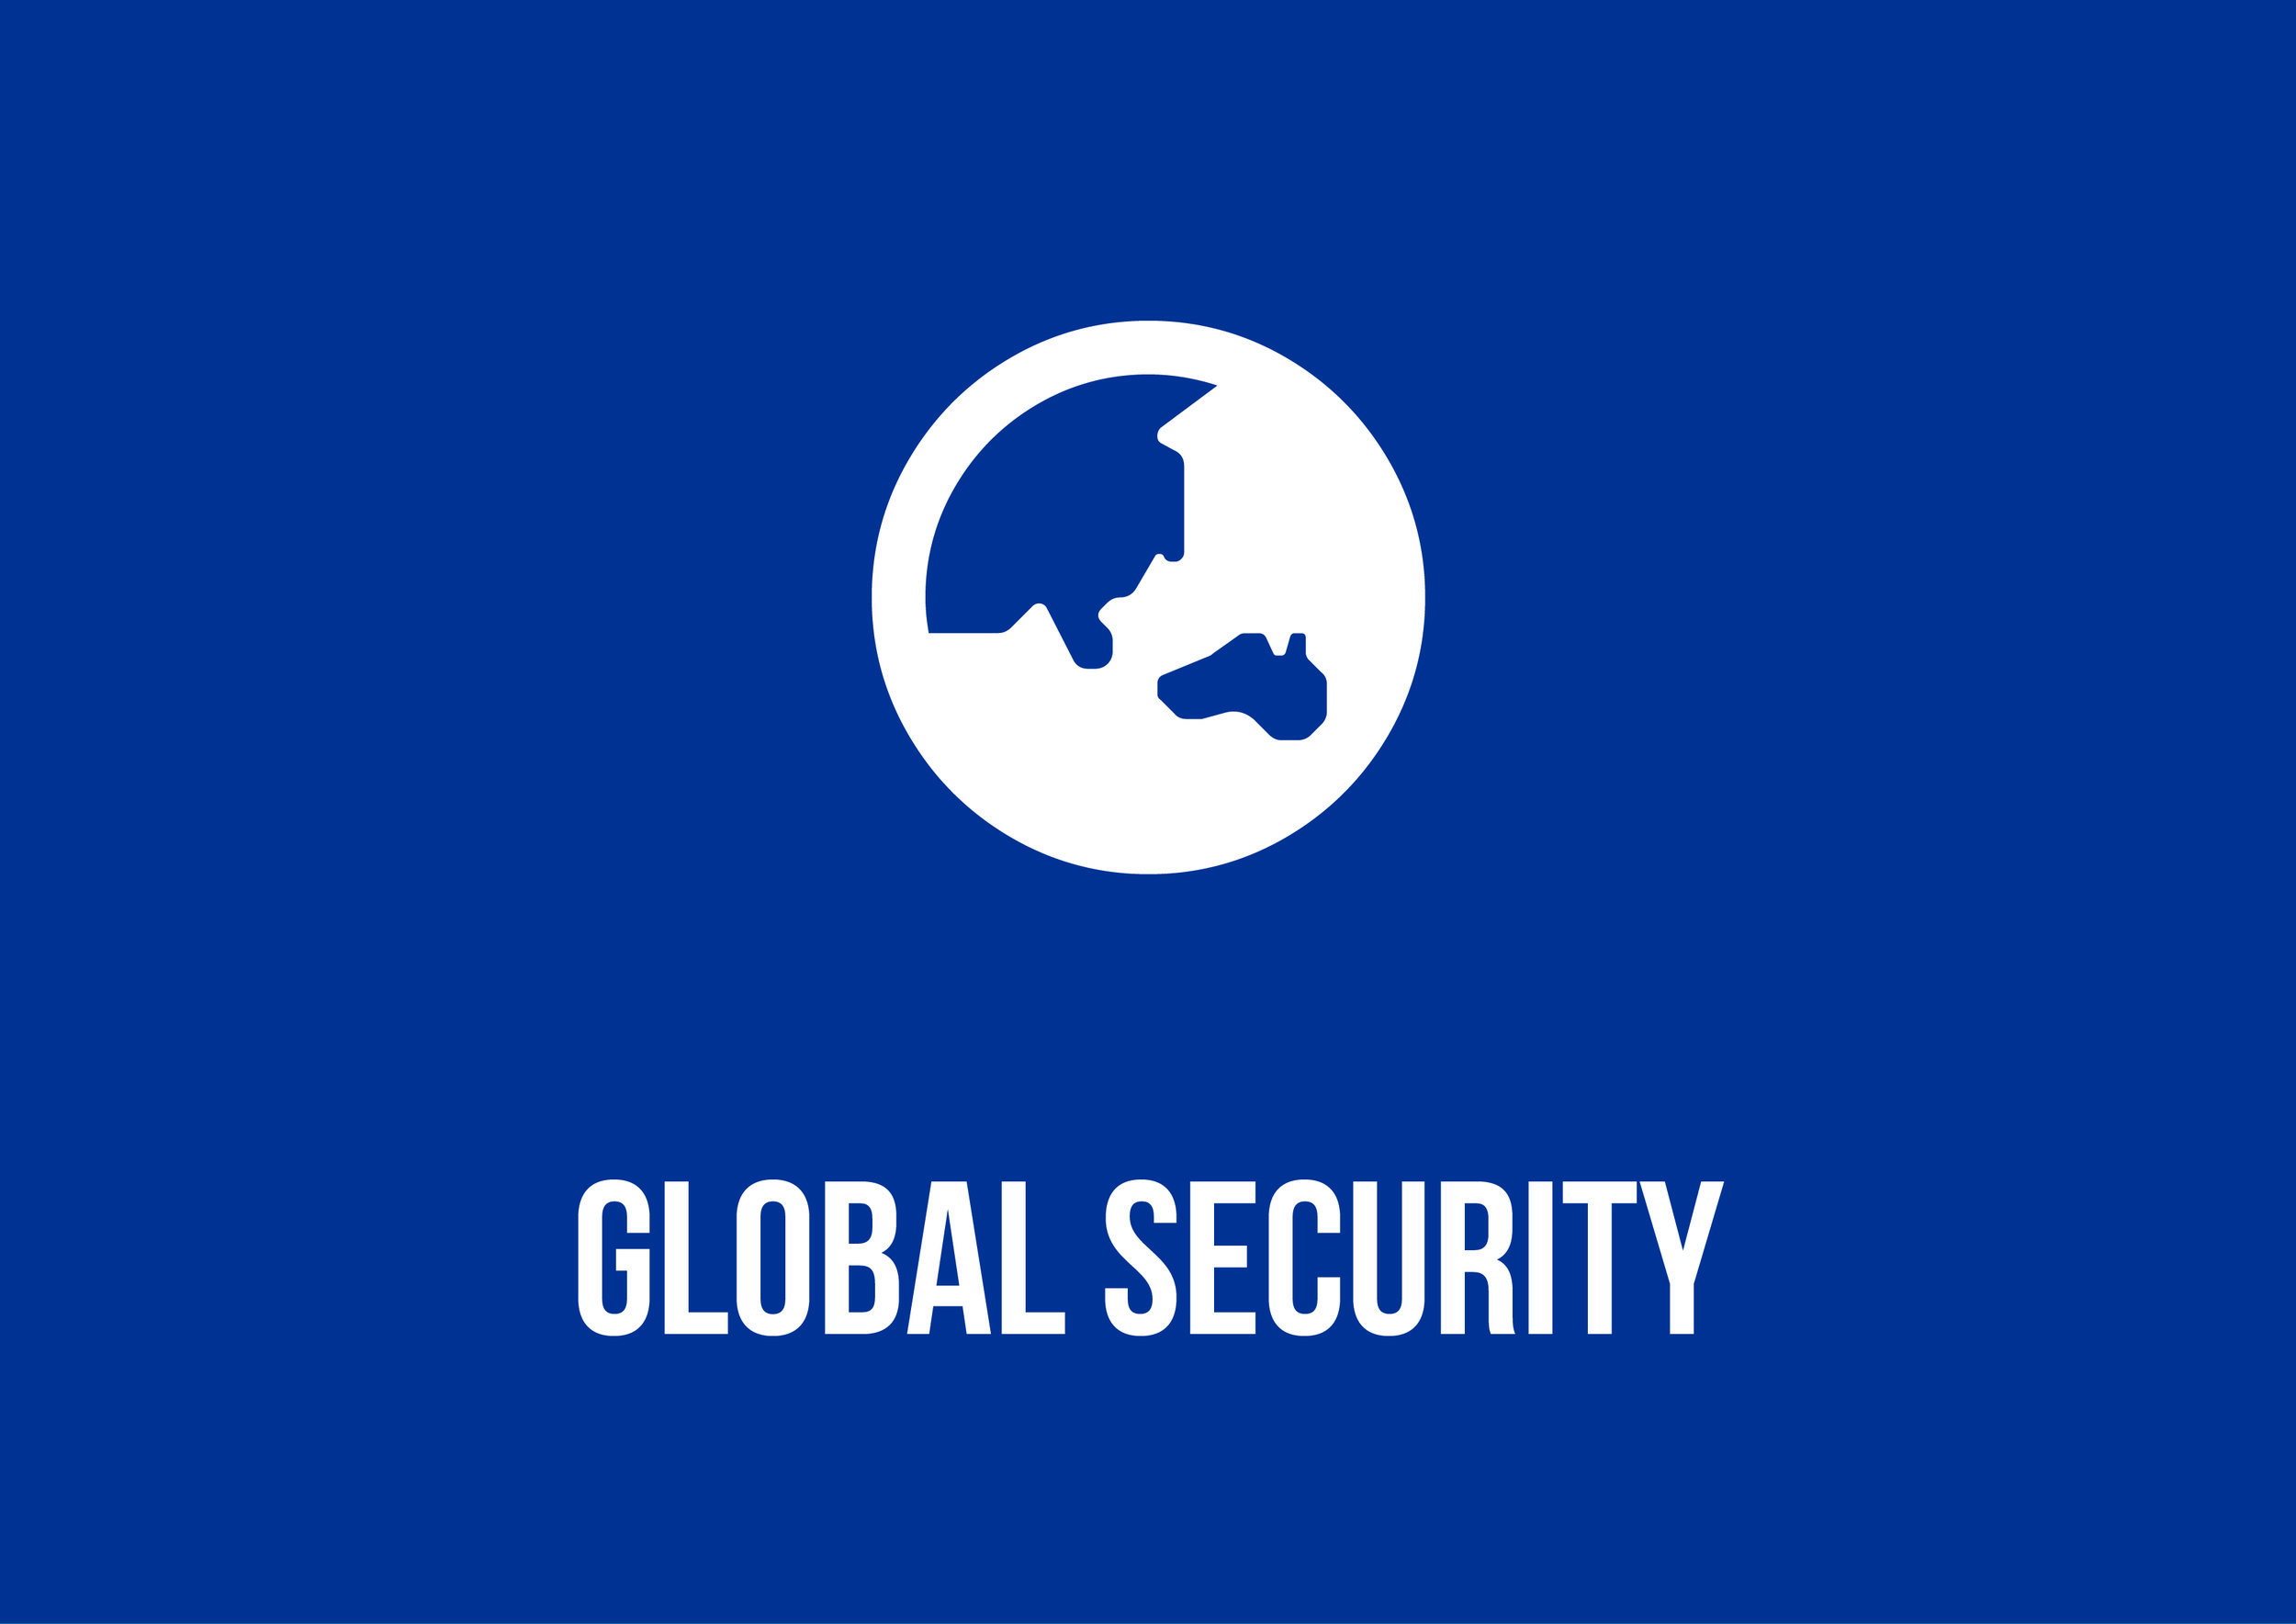 Contribution to Global Security